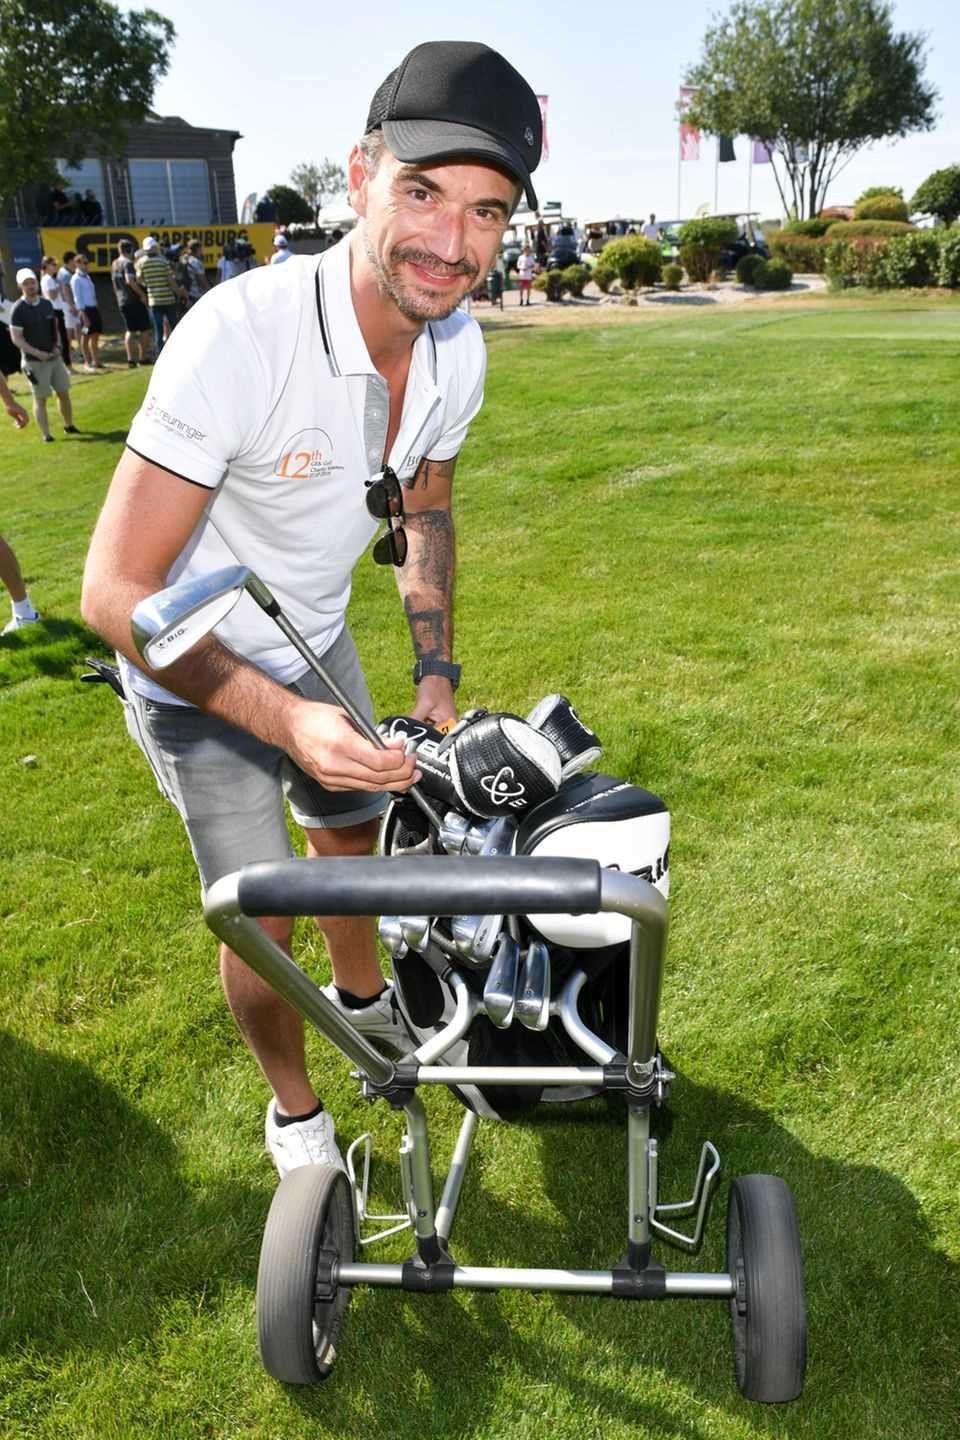 Pop star Florian Silbereisen went among the golfers for a good cause.  Both "GRK Golf Charity Masters" in Leipzig, he and other celebrities collect donations, especially for disadvantaged children. 